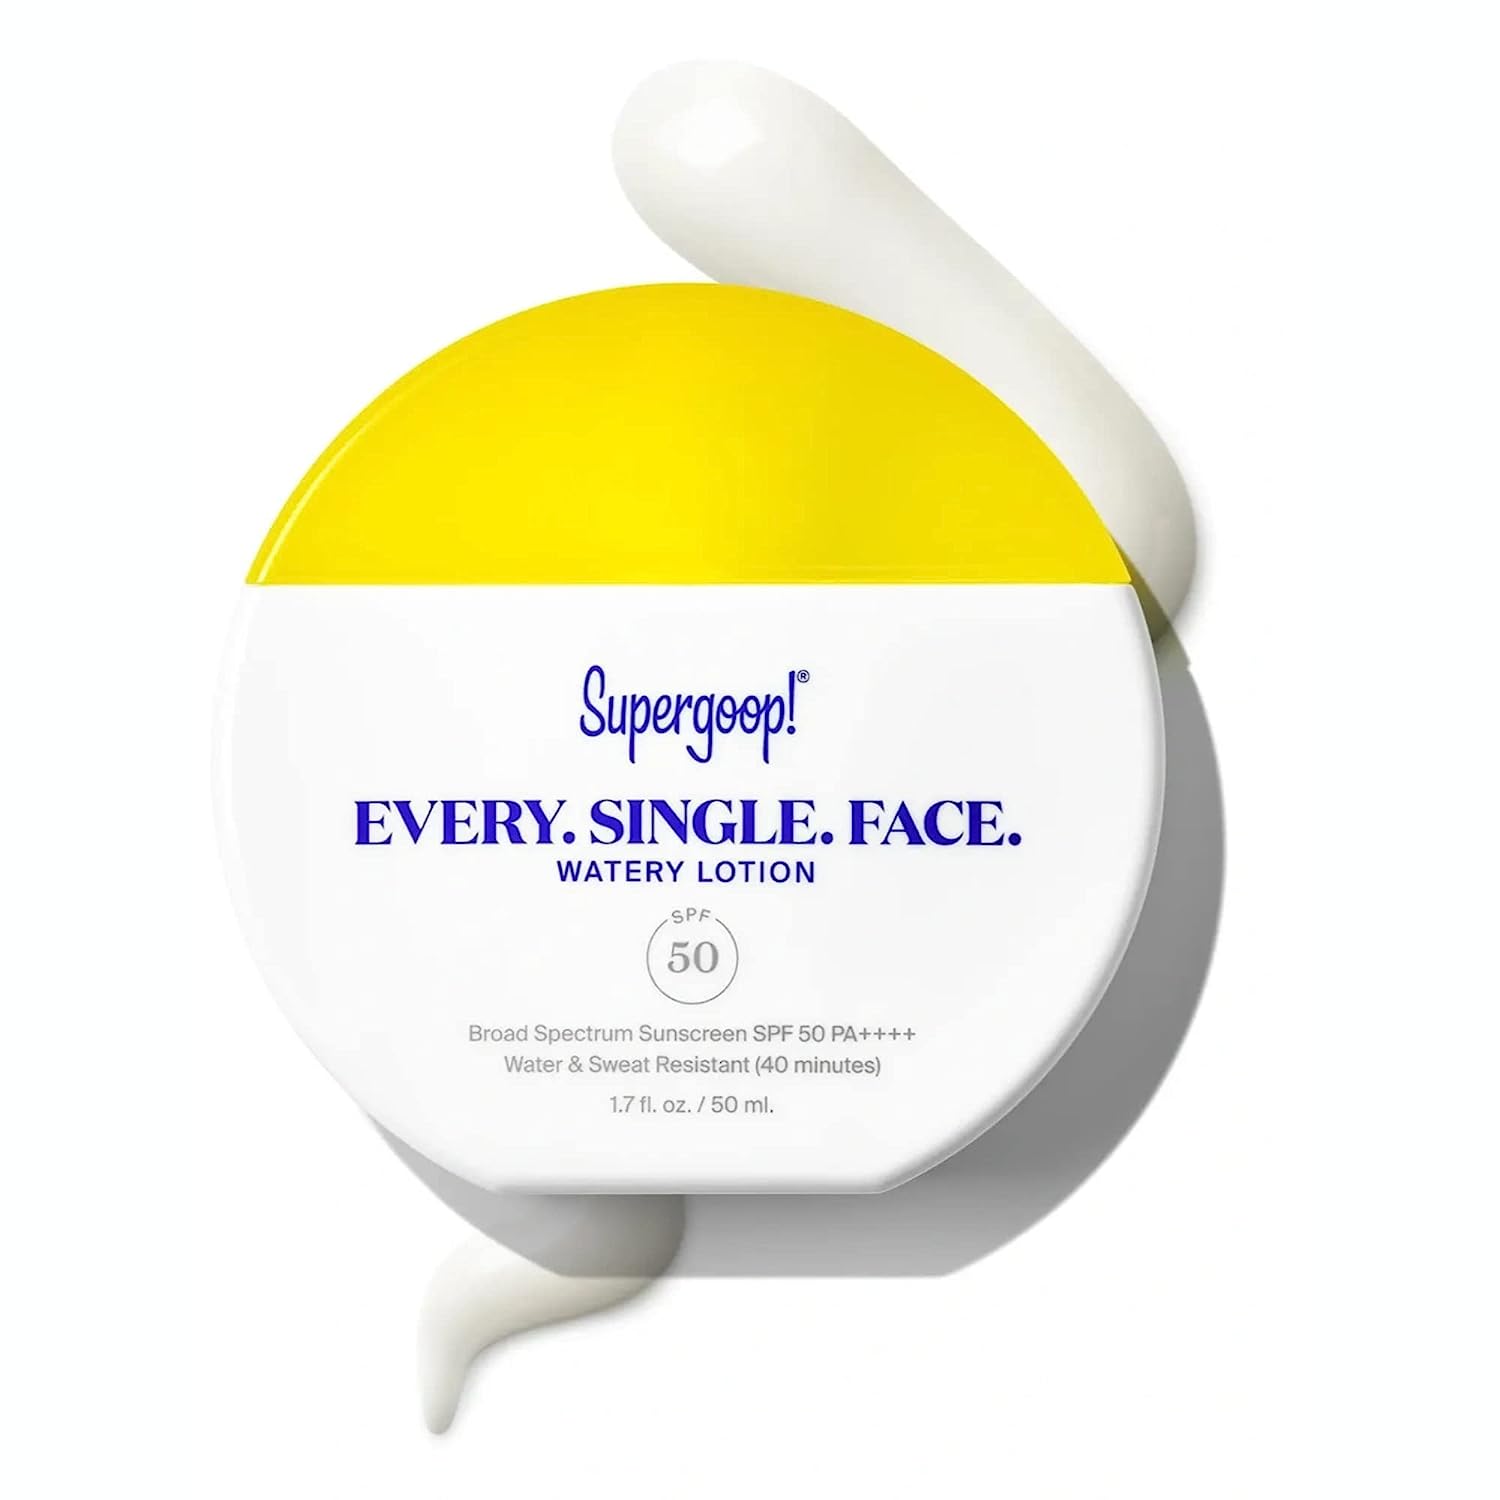 Supergoop! Every. Single. Face. Watery Lotion SPF 50 1.7 / 50 mL